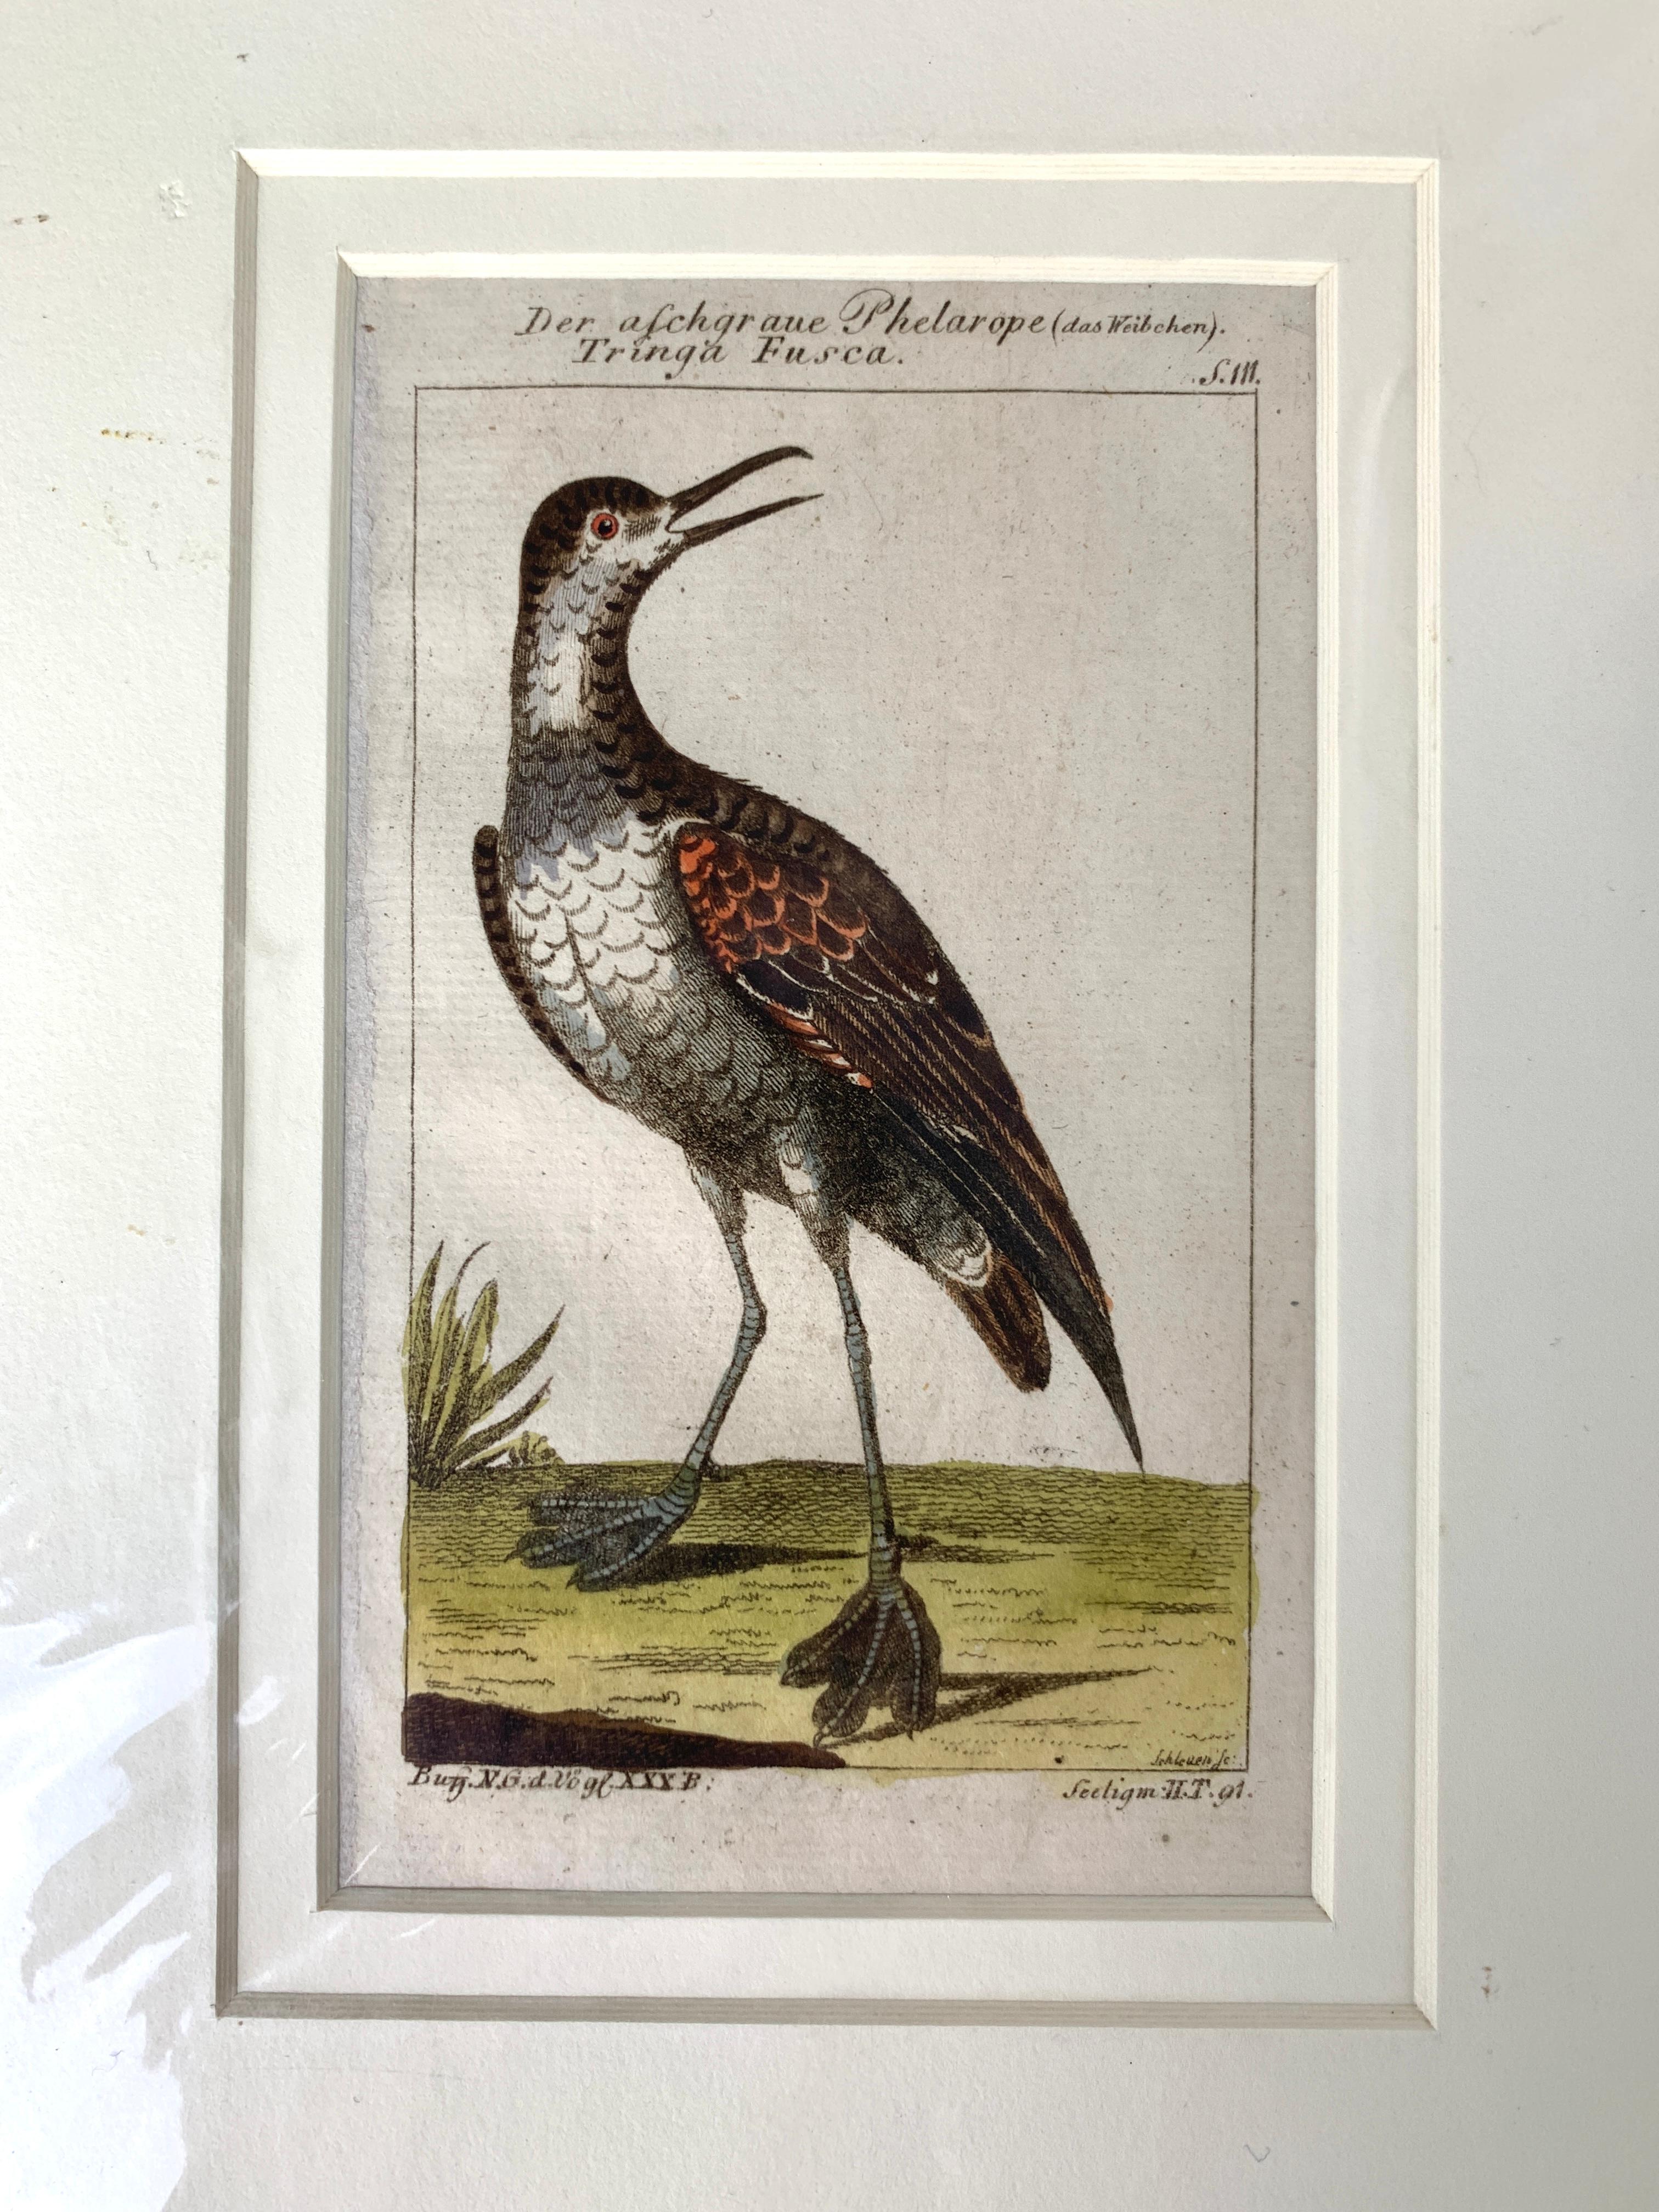 These are small, gem-like, individual bird scenes.
They are beautifully drawn, detailed prints of hand-colored copperplate engravings from one of the most important ornithological works of the 18th century. 
These hand-colored engravings were